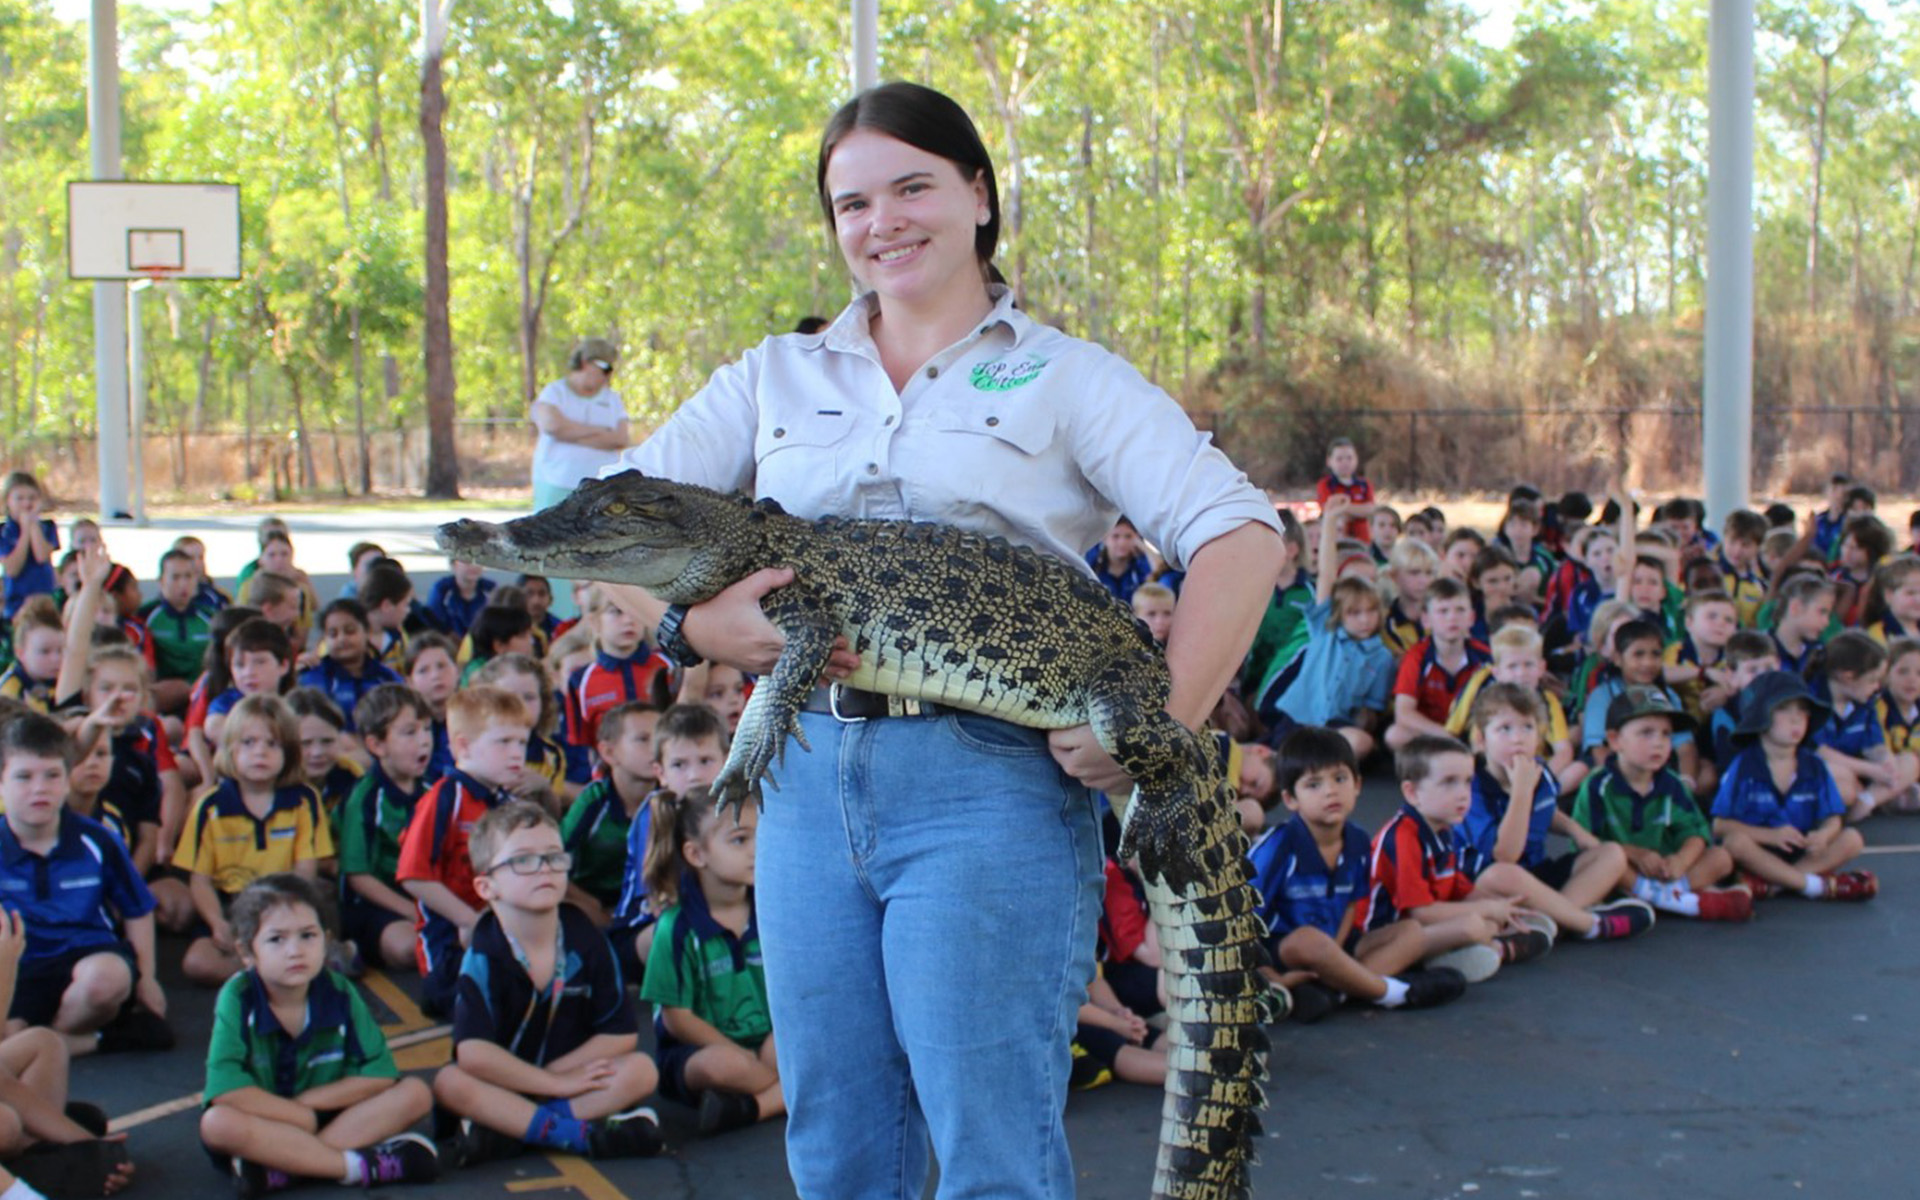 Top End Critters staff holding crocodile with students in background.